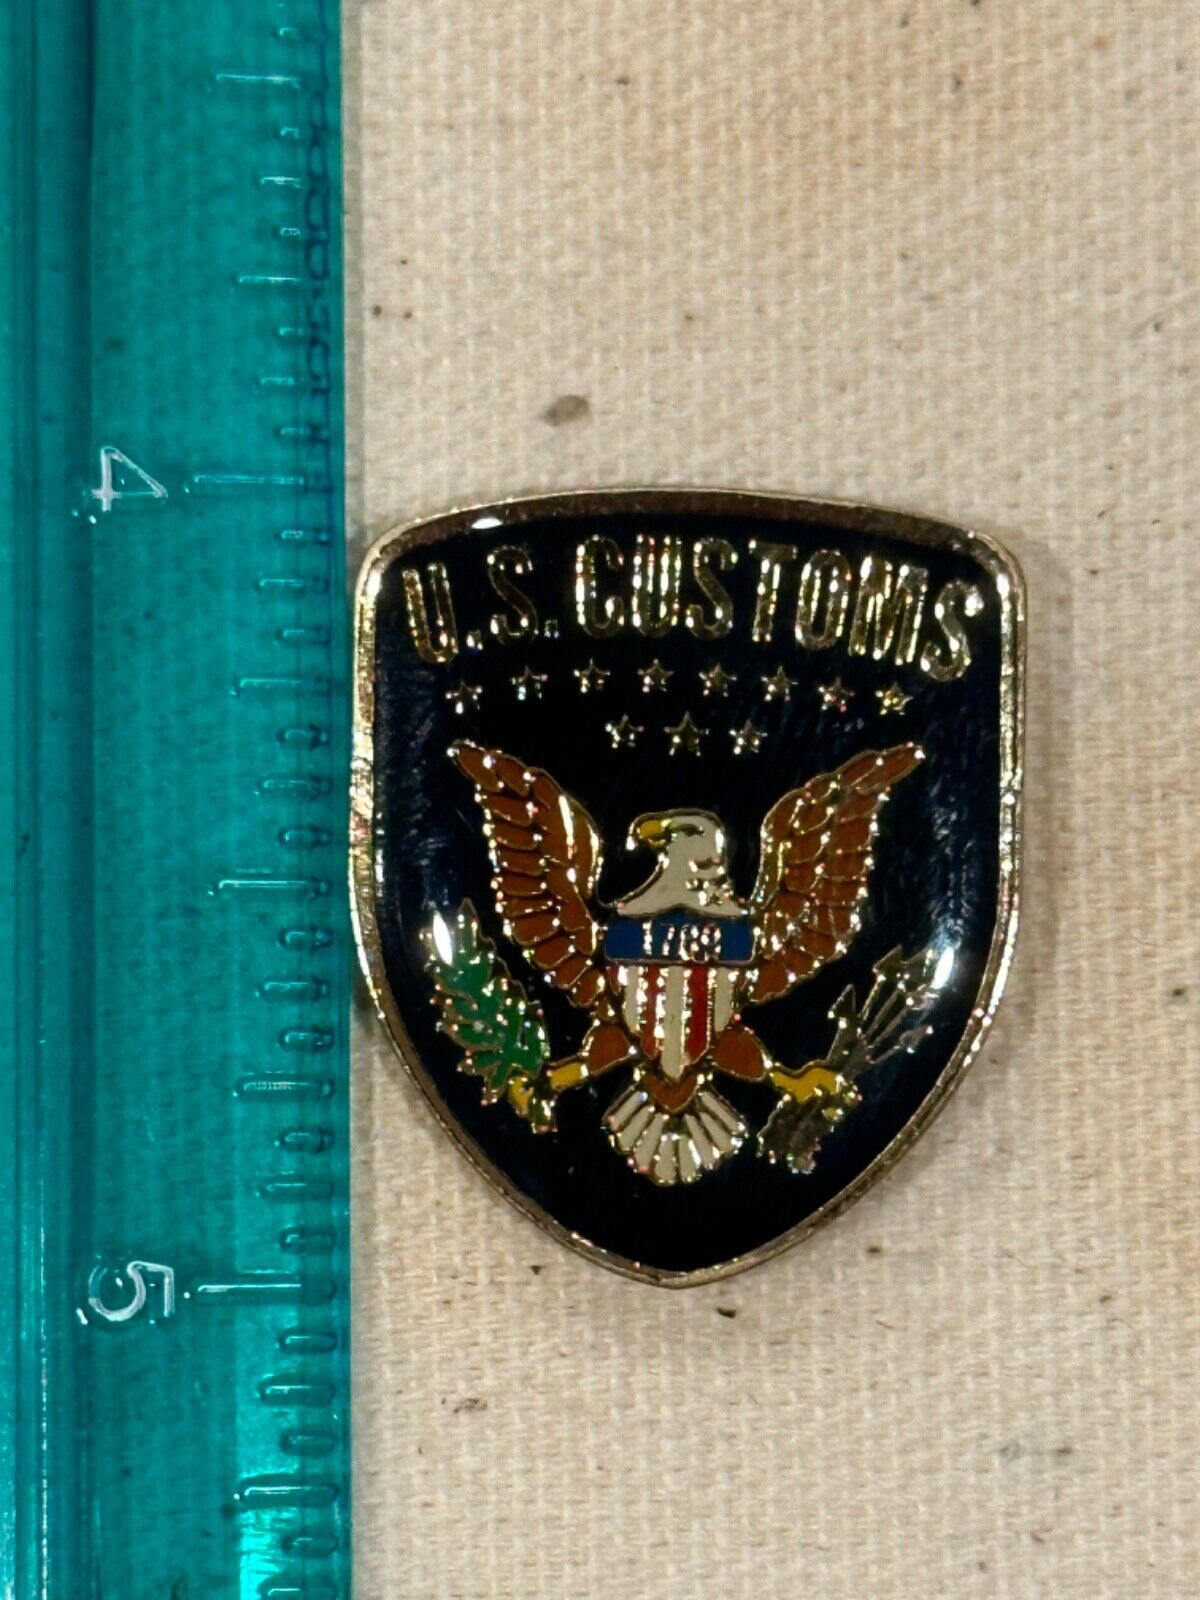 REAL AND EXTREMELY RARE US CUSTOMS SERVICE PIN FBI DEA